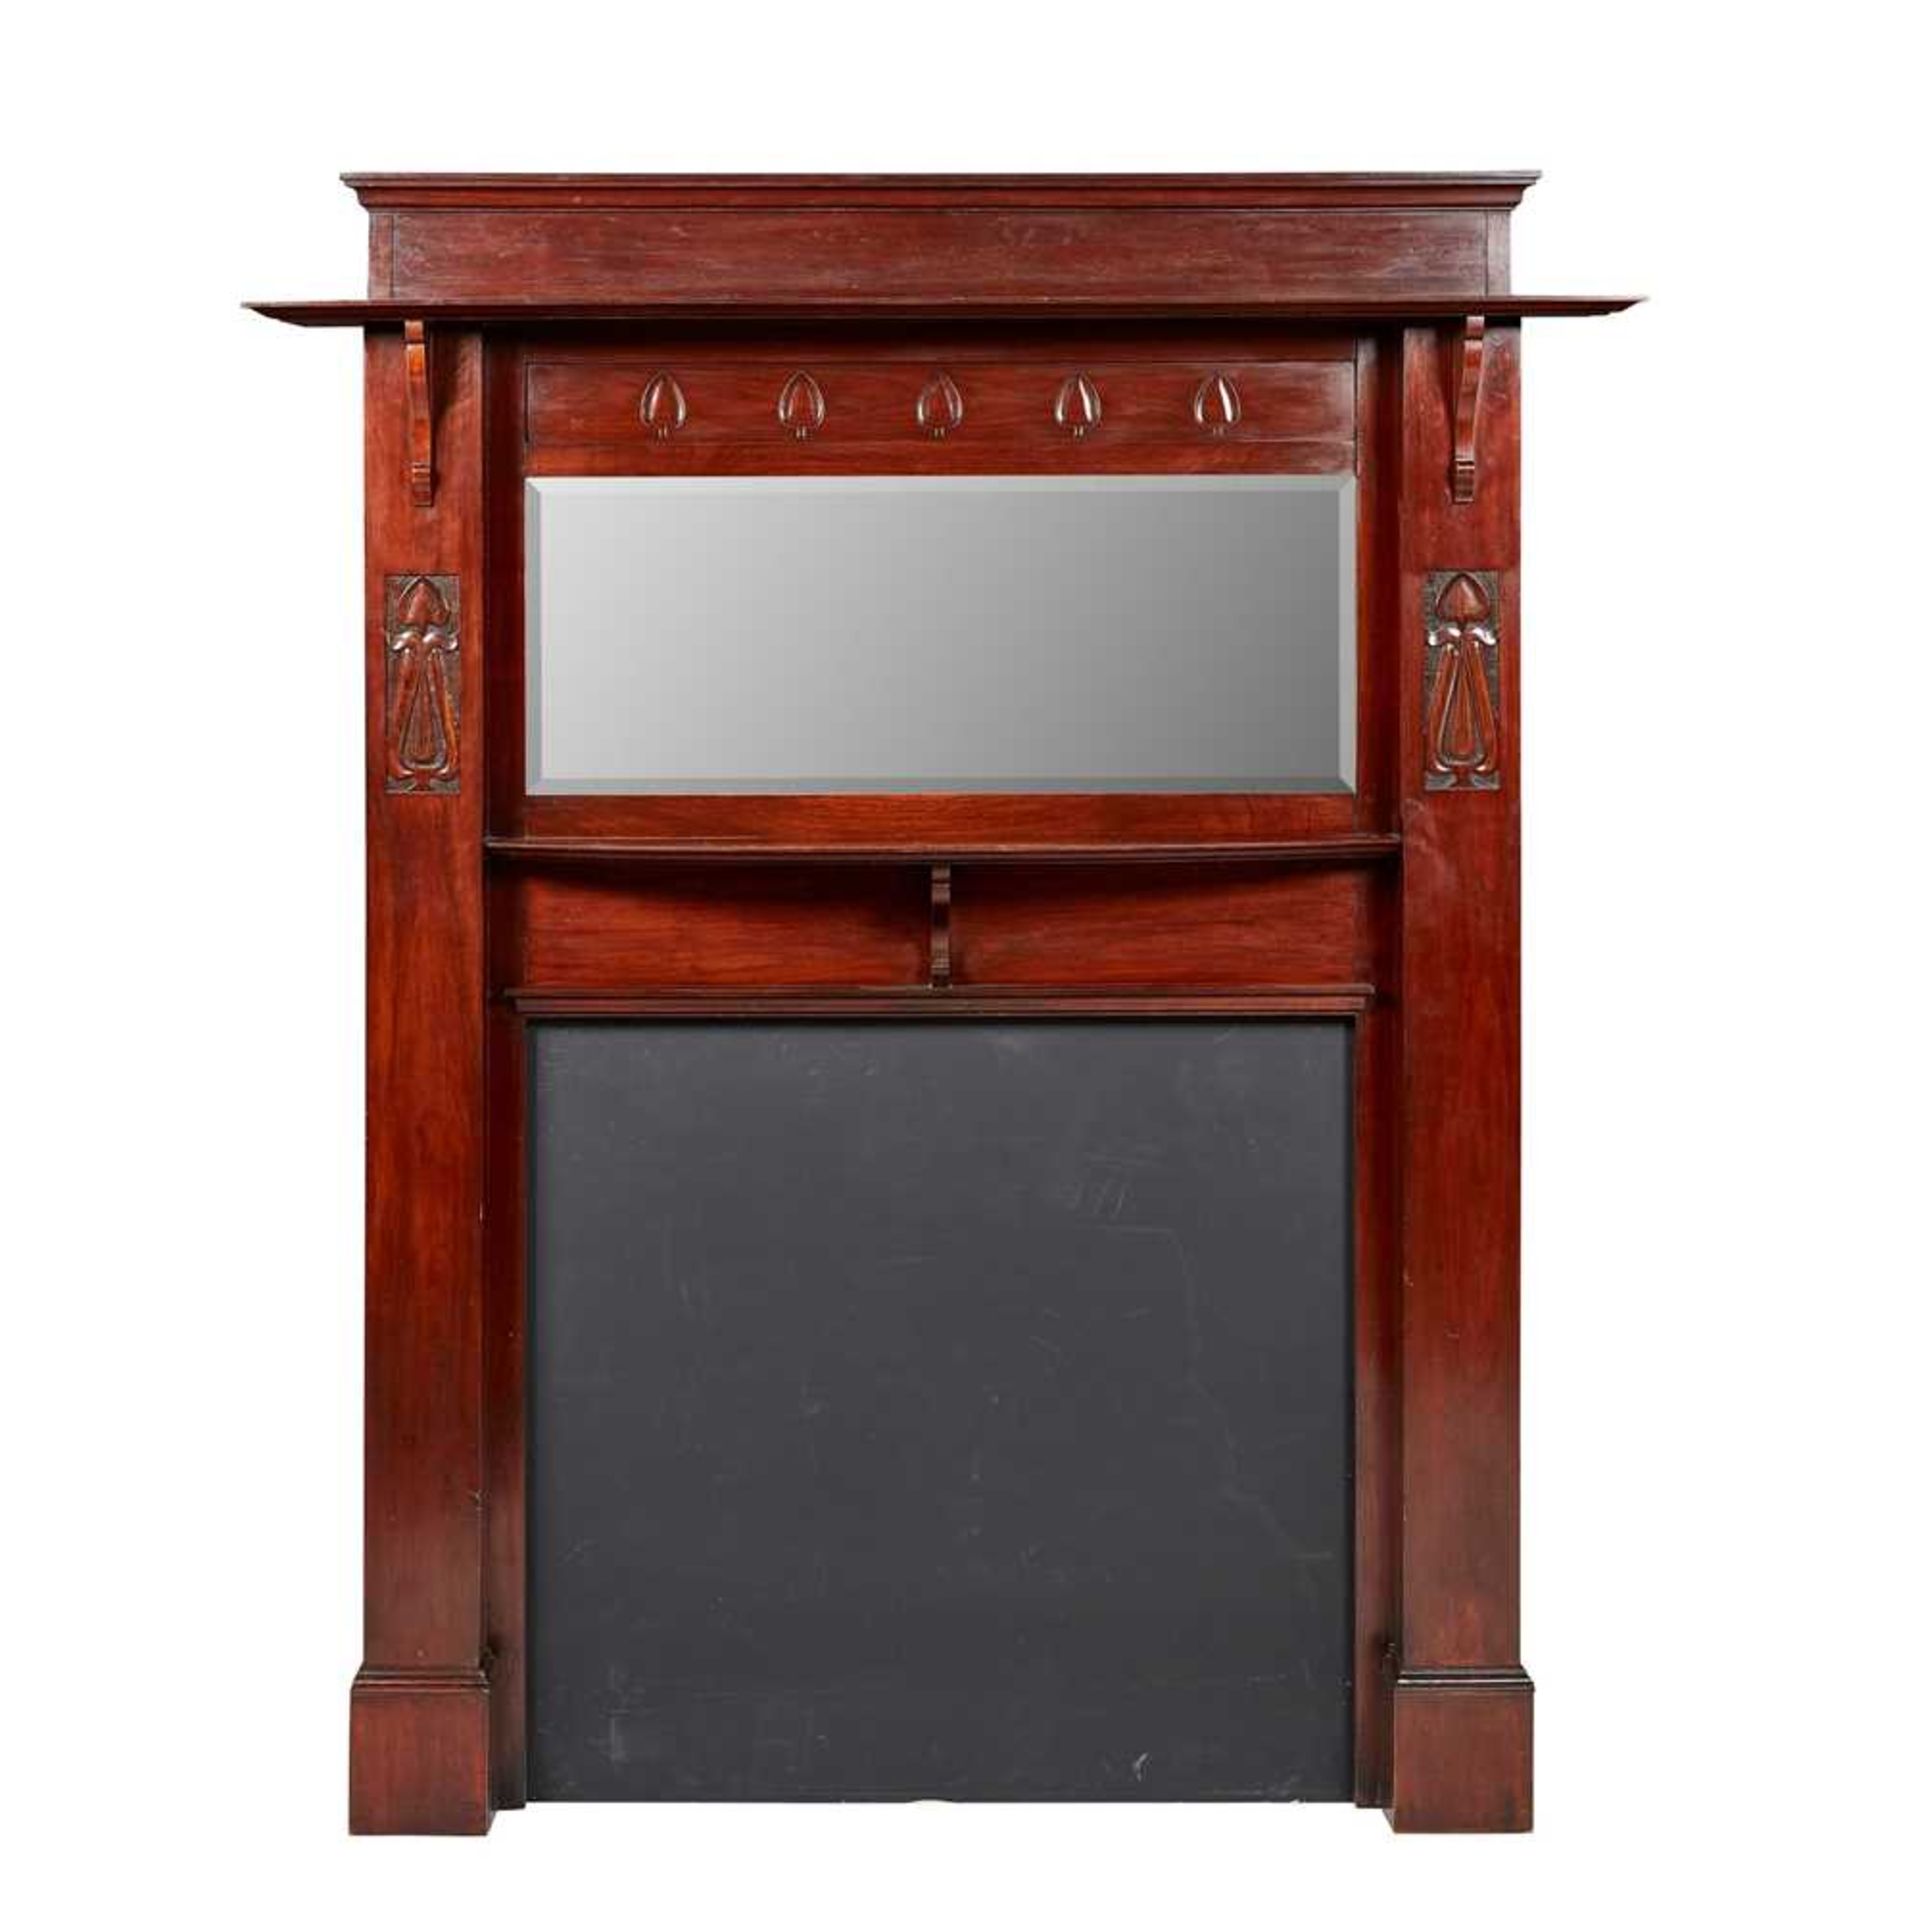 MANNER OF E. A. TAYLOR FOR WYLIE & LOCHHEAD GLASGOW SCHOOL FIRE SURROUND AND OVERMANTEL, CIRCA 1900